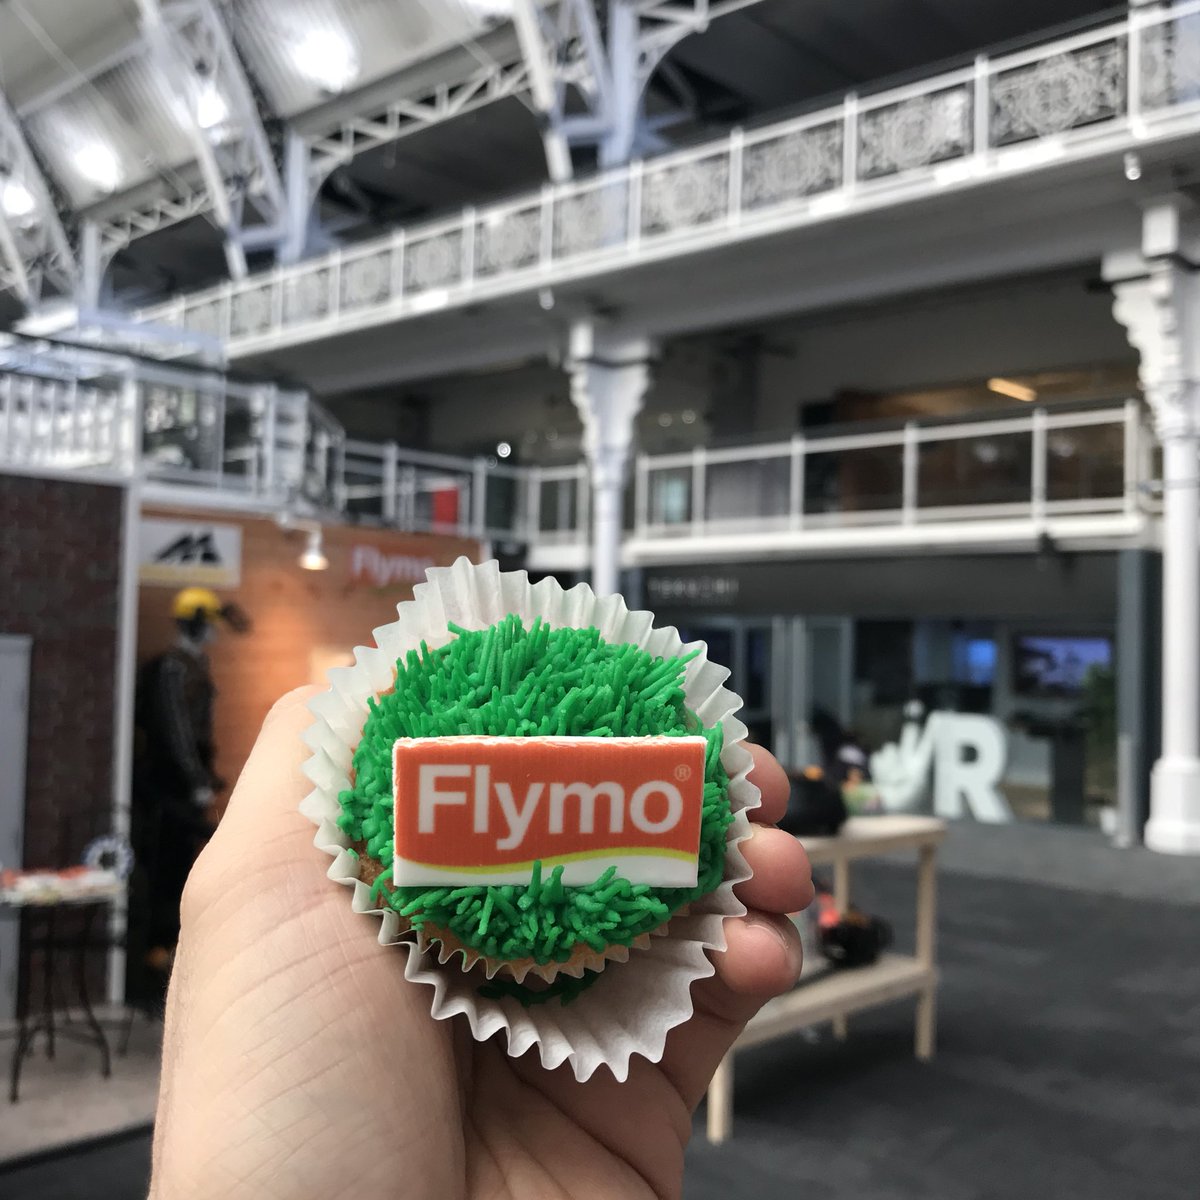 FOUR more cool things from @GardenPresEvent today: Personalised Terracotta from @woodlodge_uk, The Eco @CoffeeLogs, Functional Water Butt @RWT_Water_Butt and a tasty, yet priceless cupcake by #Flymo !